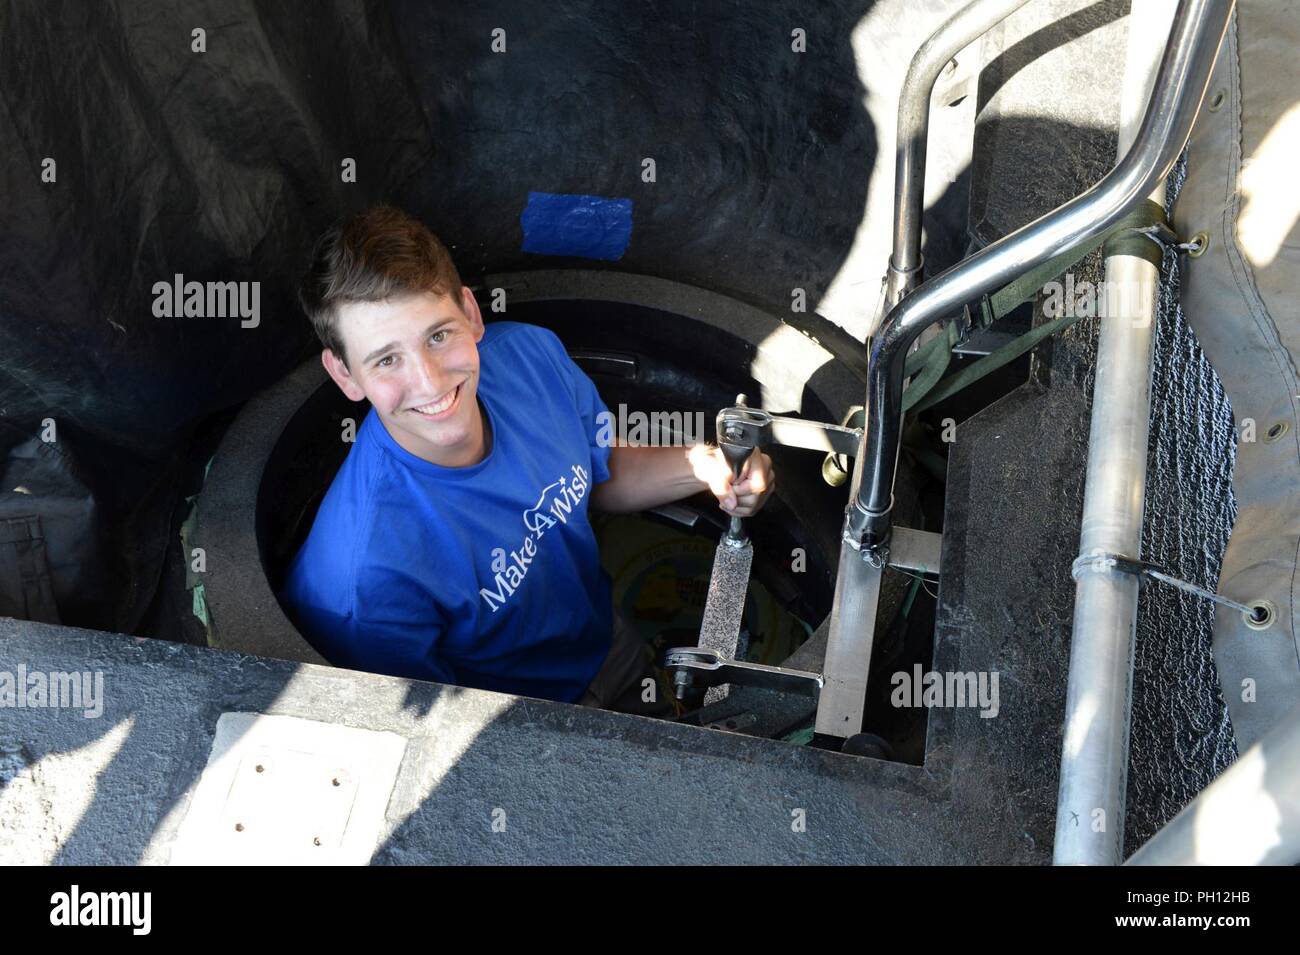 GROTON, Conn. (Jun. 19, 2018) Seventeen-year-old, Troy Perna, climbs down a vertical ladder during a tour aboard the Los Angeles class, fast-attack submarine, USS Hartford (SSN 768) during a tour arranged by the Make-A-Wish Foundation and Travelers Championship. The tour also included also included spending the day with professional golfer, Jordan Spieth during the Travelers Championship. The Make-A-Wish Foundation arranges experiences, or 'wishes', to children with life-threatening medical conditions from ages three to 17 years-old. Stock Photo